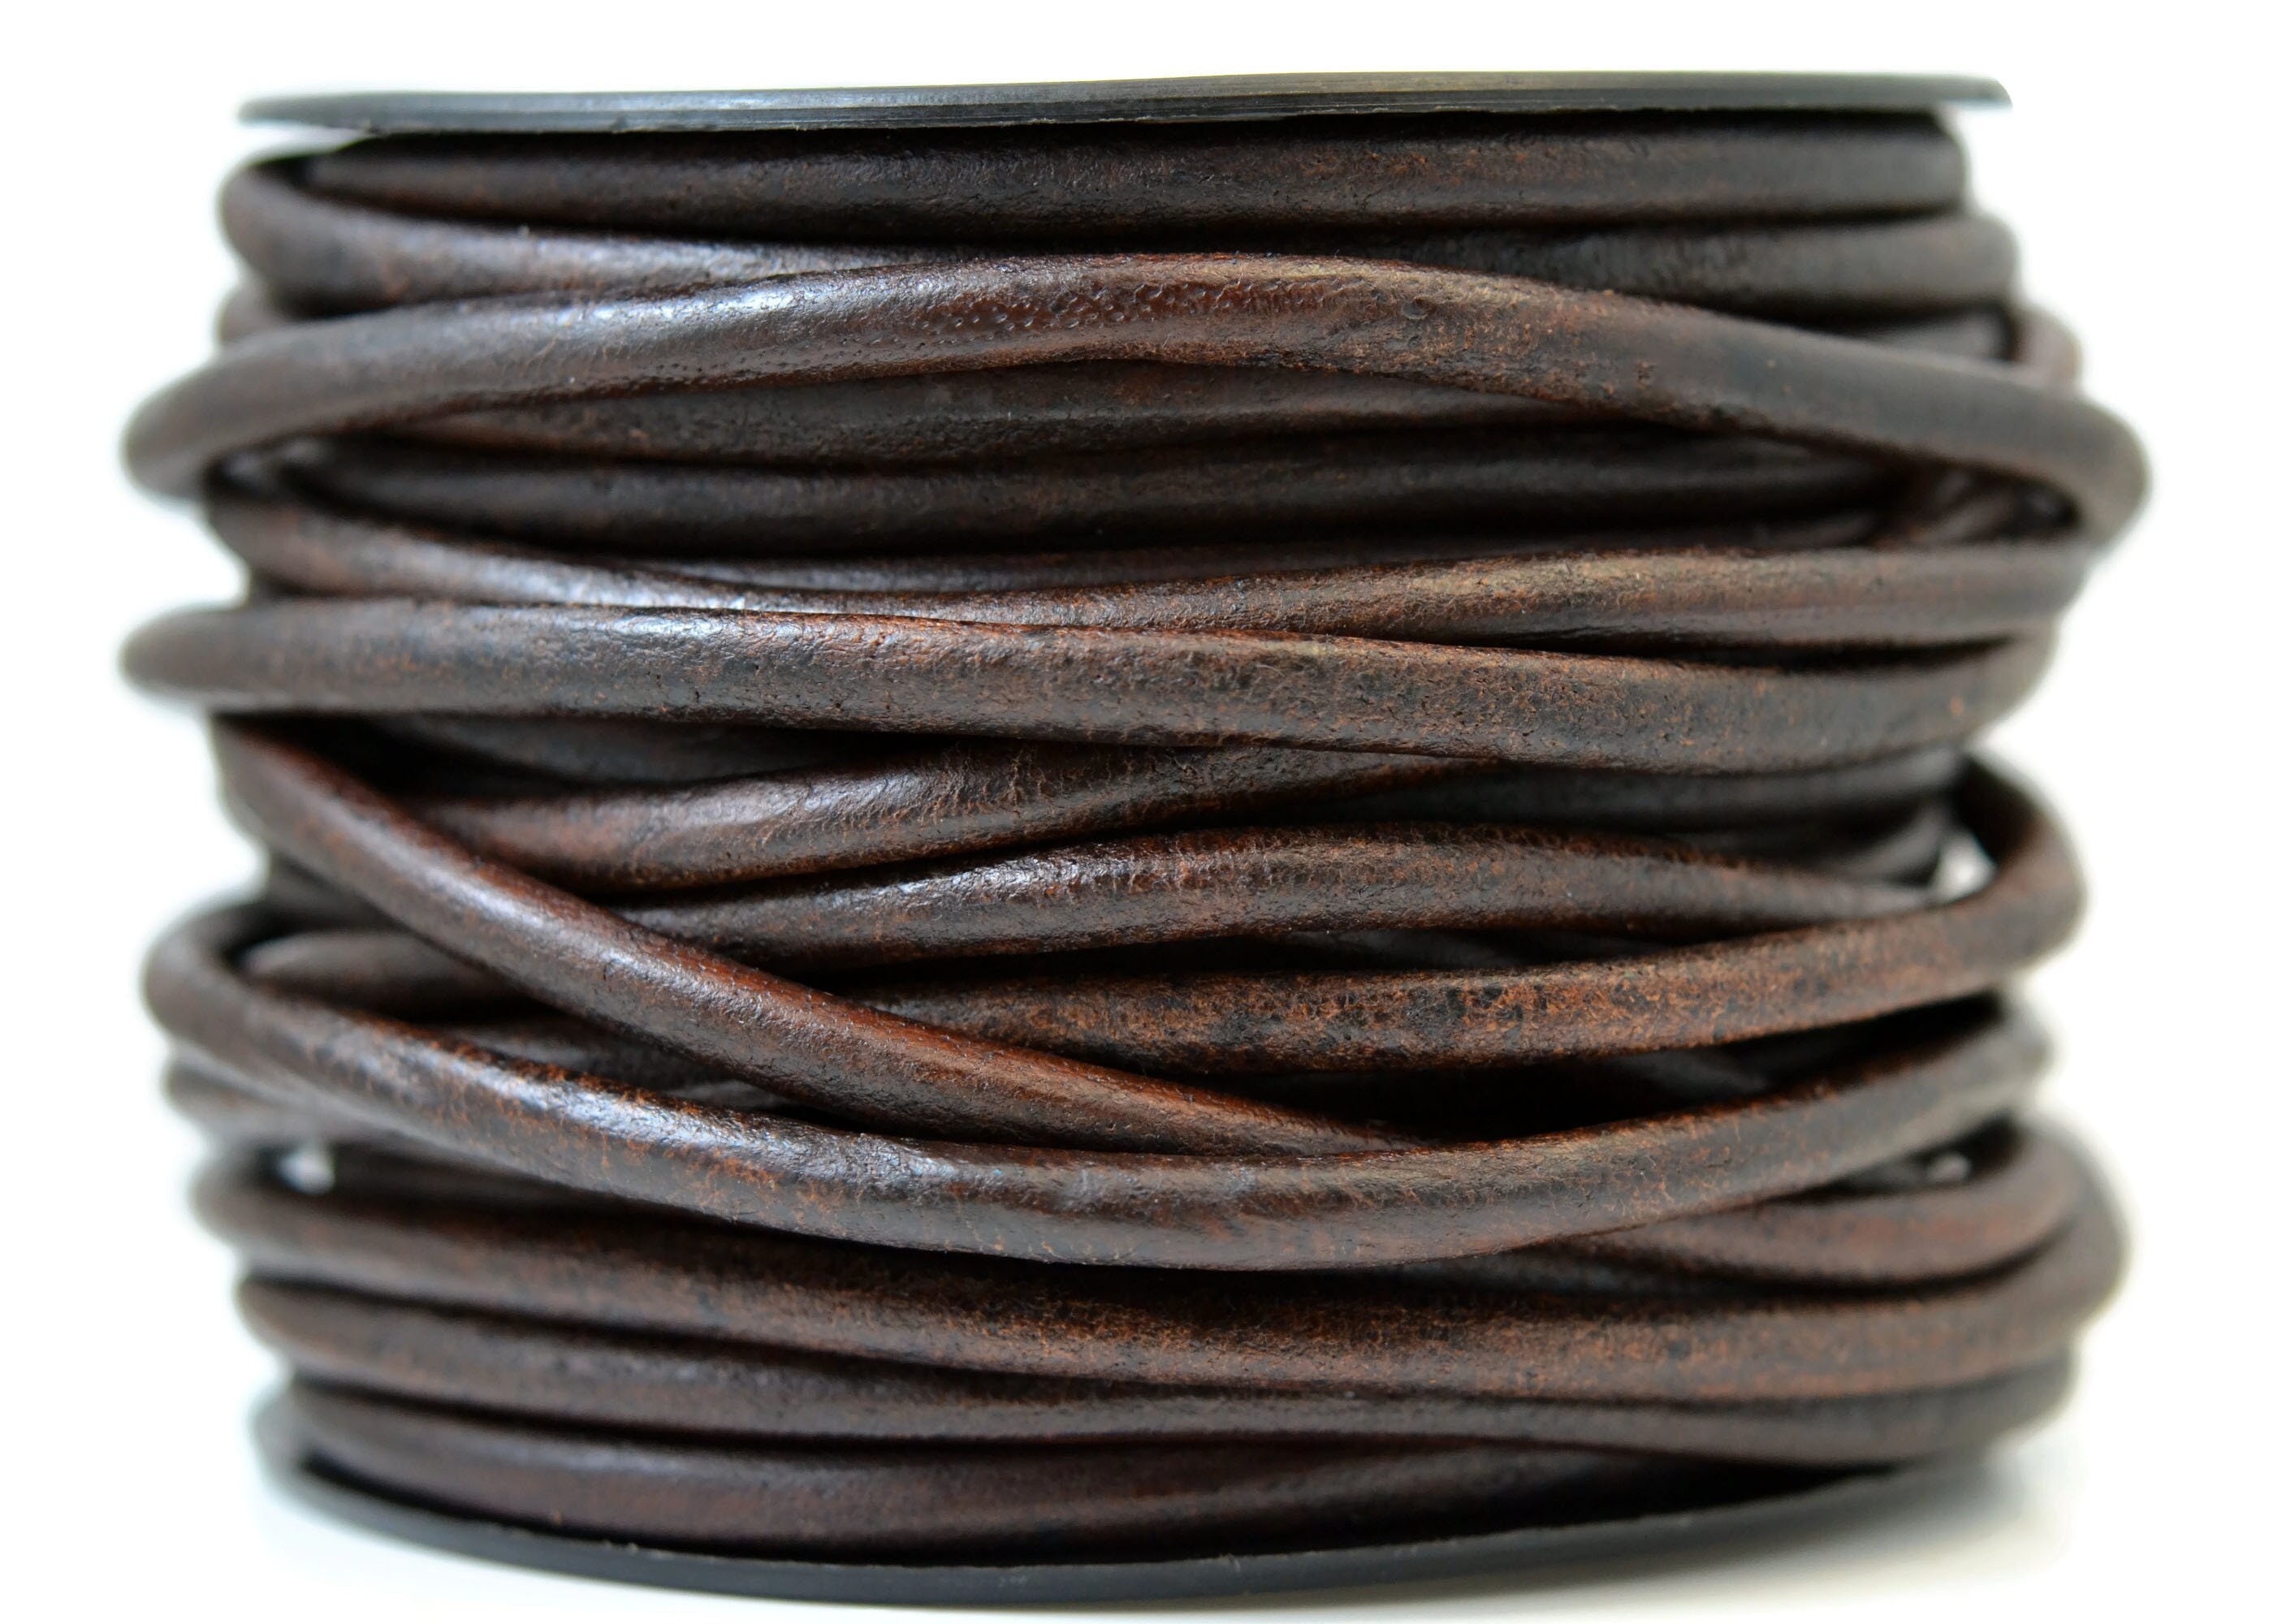  5 Mets Dia 6mm Round Braided Leather Cord-Braided